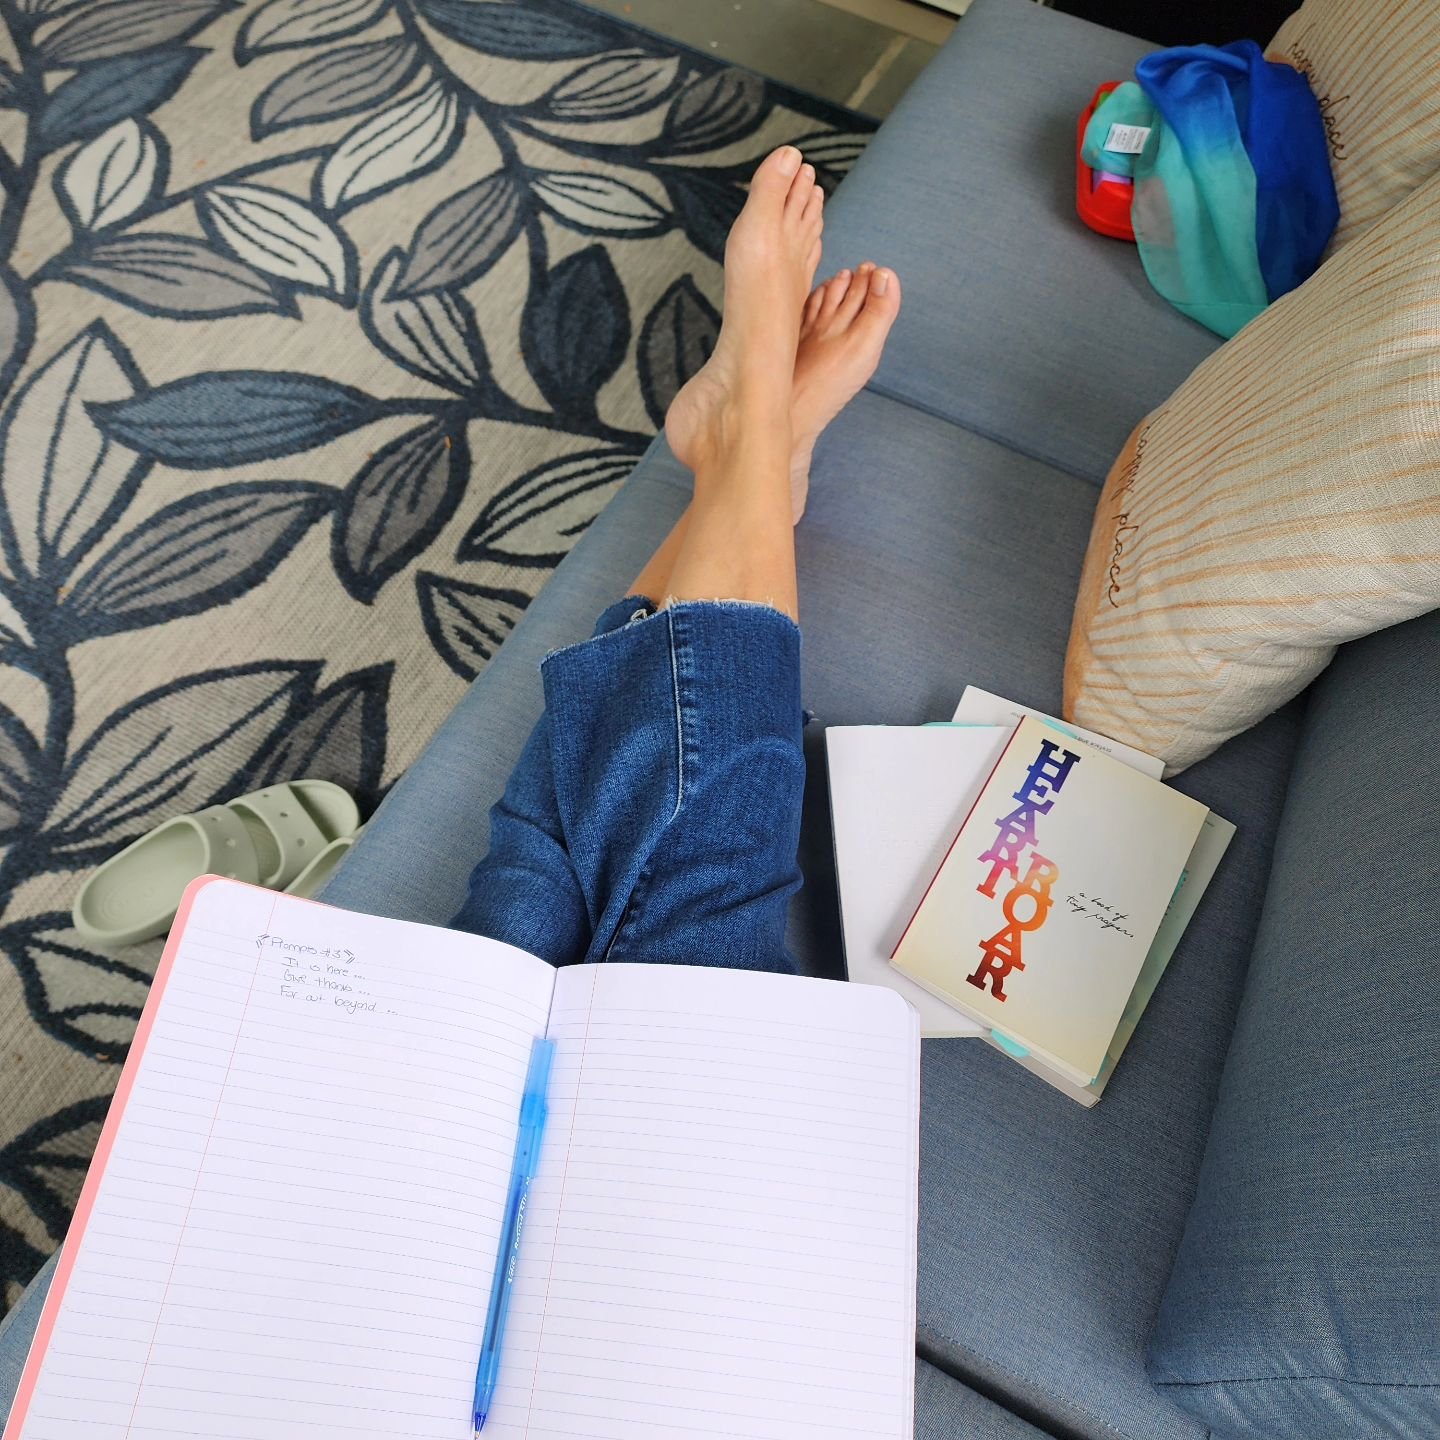 It feels like a lifetime ago when I would gather with others online and host a weekly writing group. Since then, I feel like I have been bouncing in and out of my writing practice. 

When I became a Mom, my world shifted in the best possible way, but